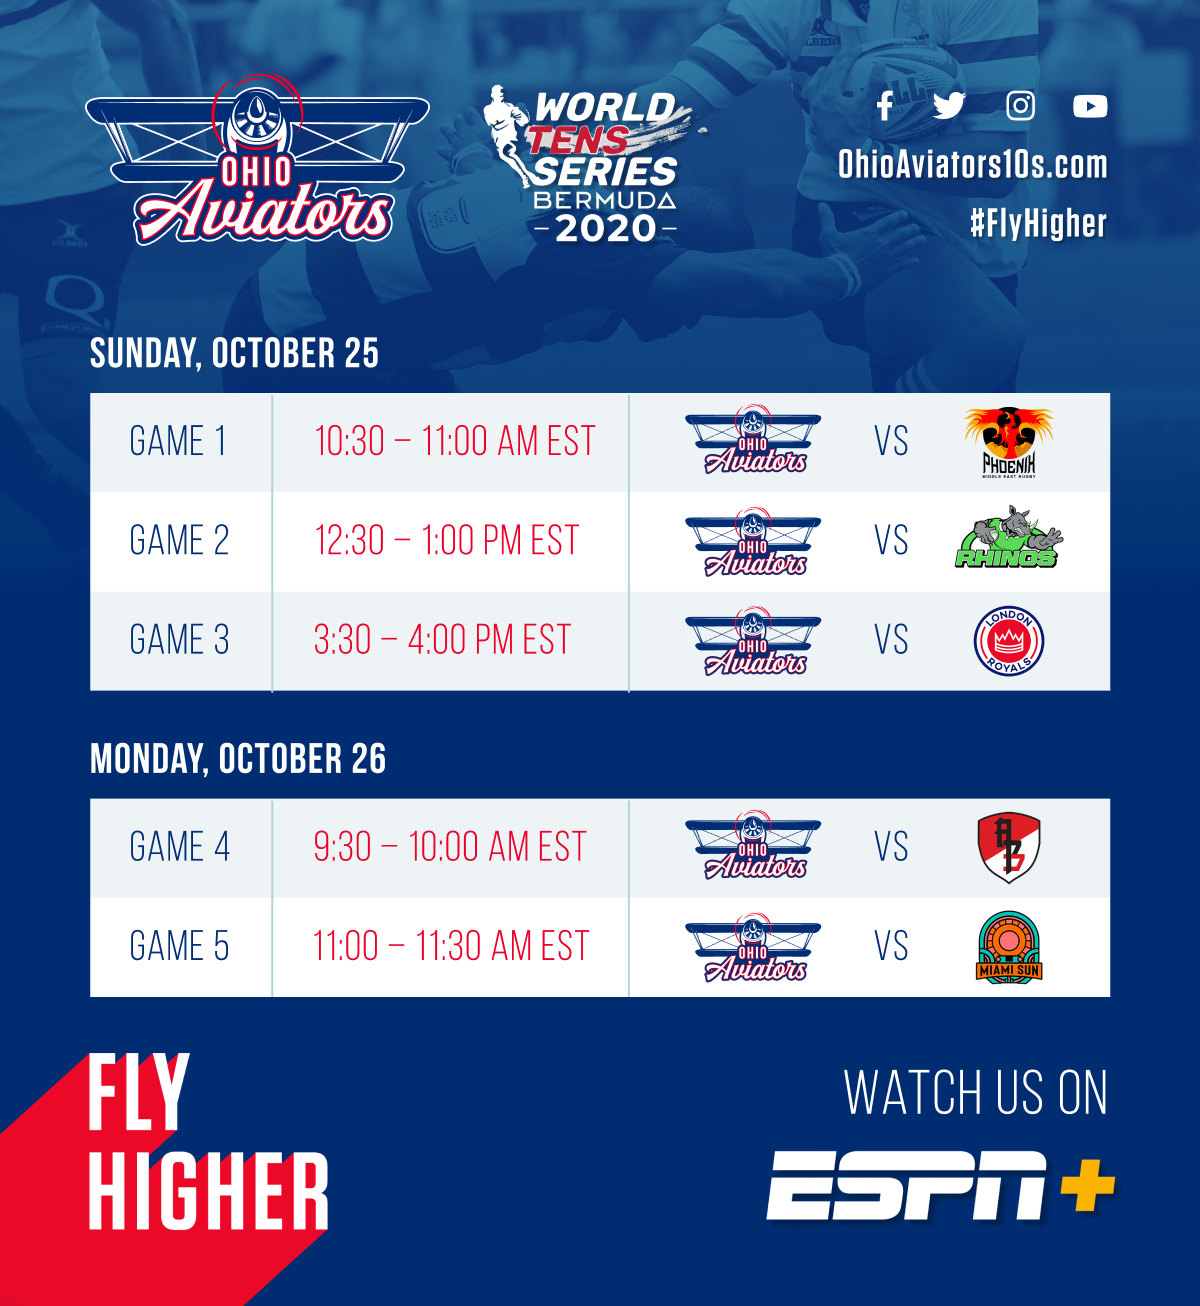 Ohio Aviators Professional Rugby is back on ESPN+ October 25-26 – Rugby